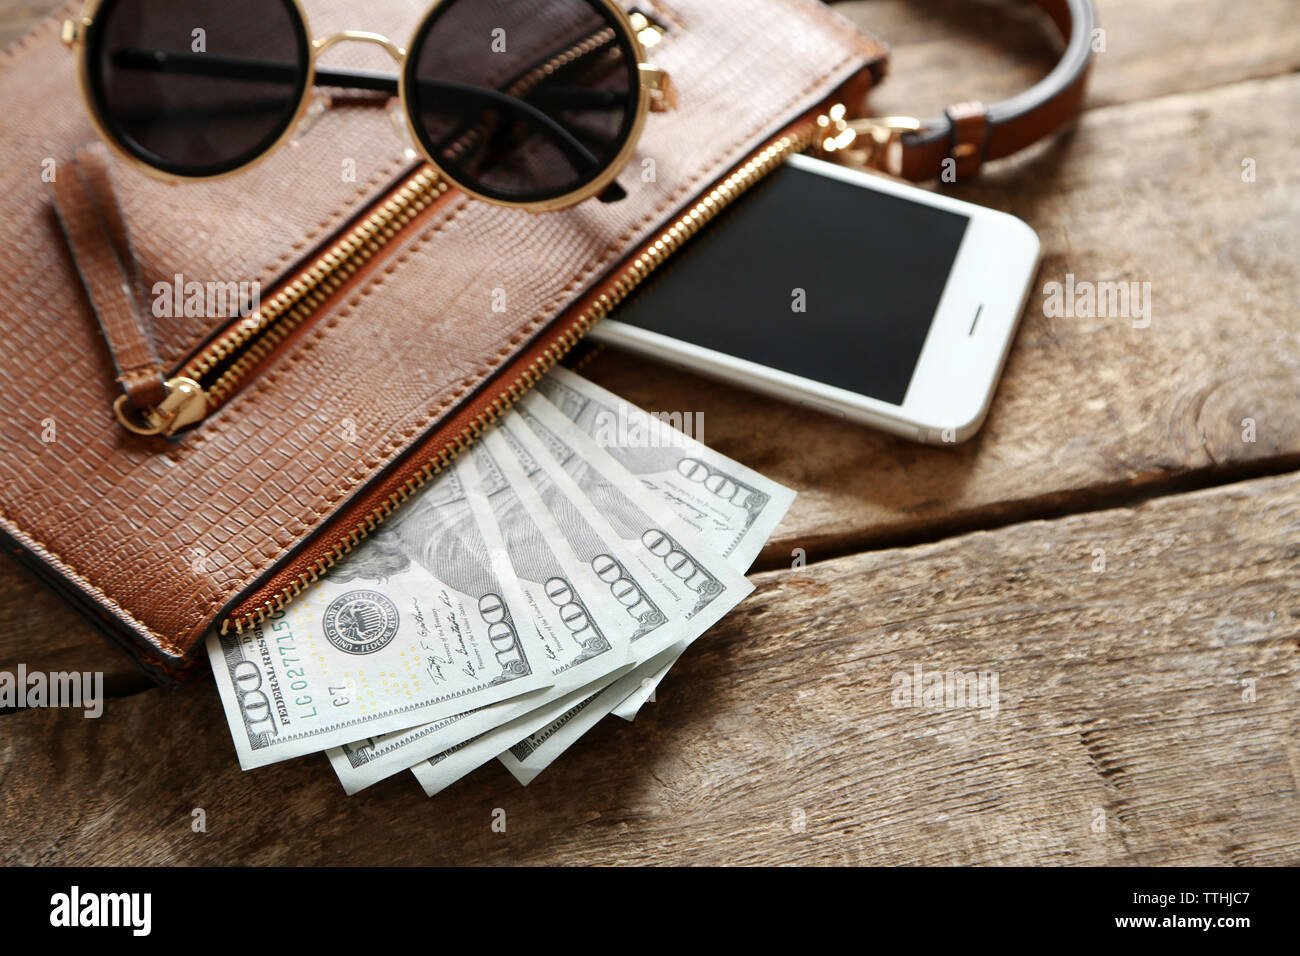 Leather purse with mobile phone, glasses and dollar banknotes on wooden table Stock Photo